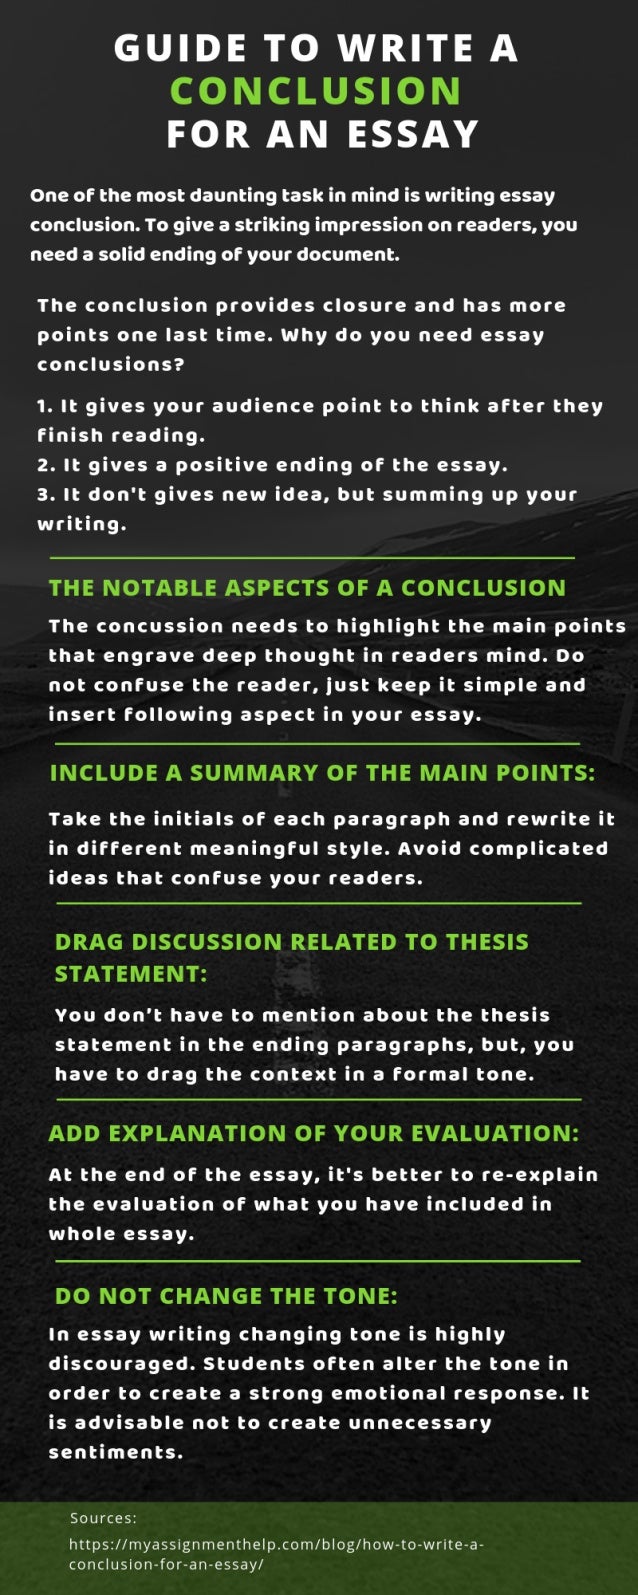 Guide to write a conclusion for an essay